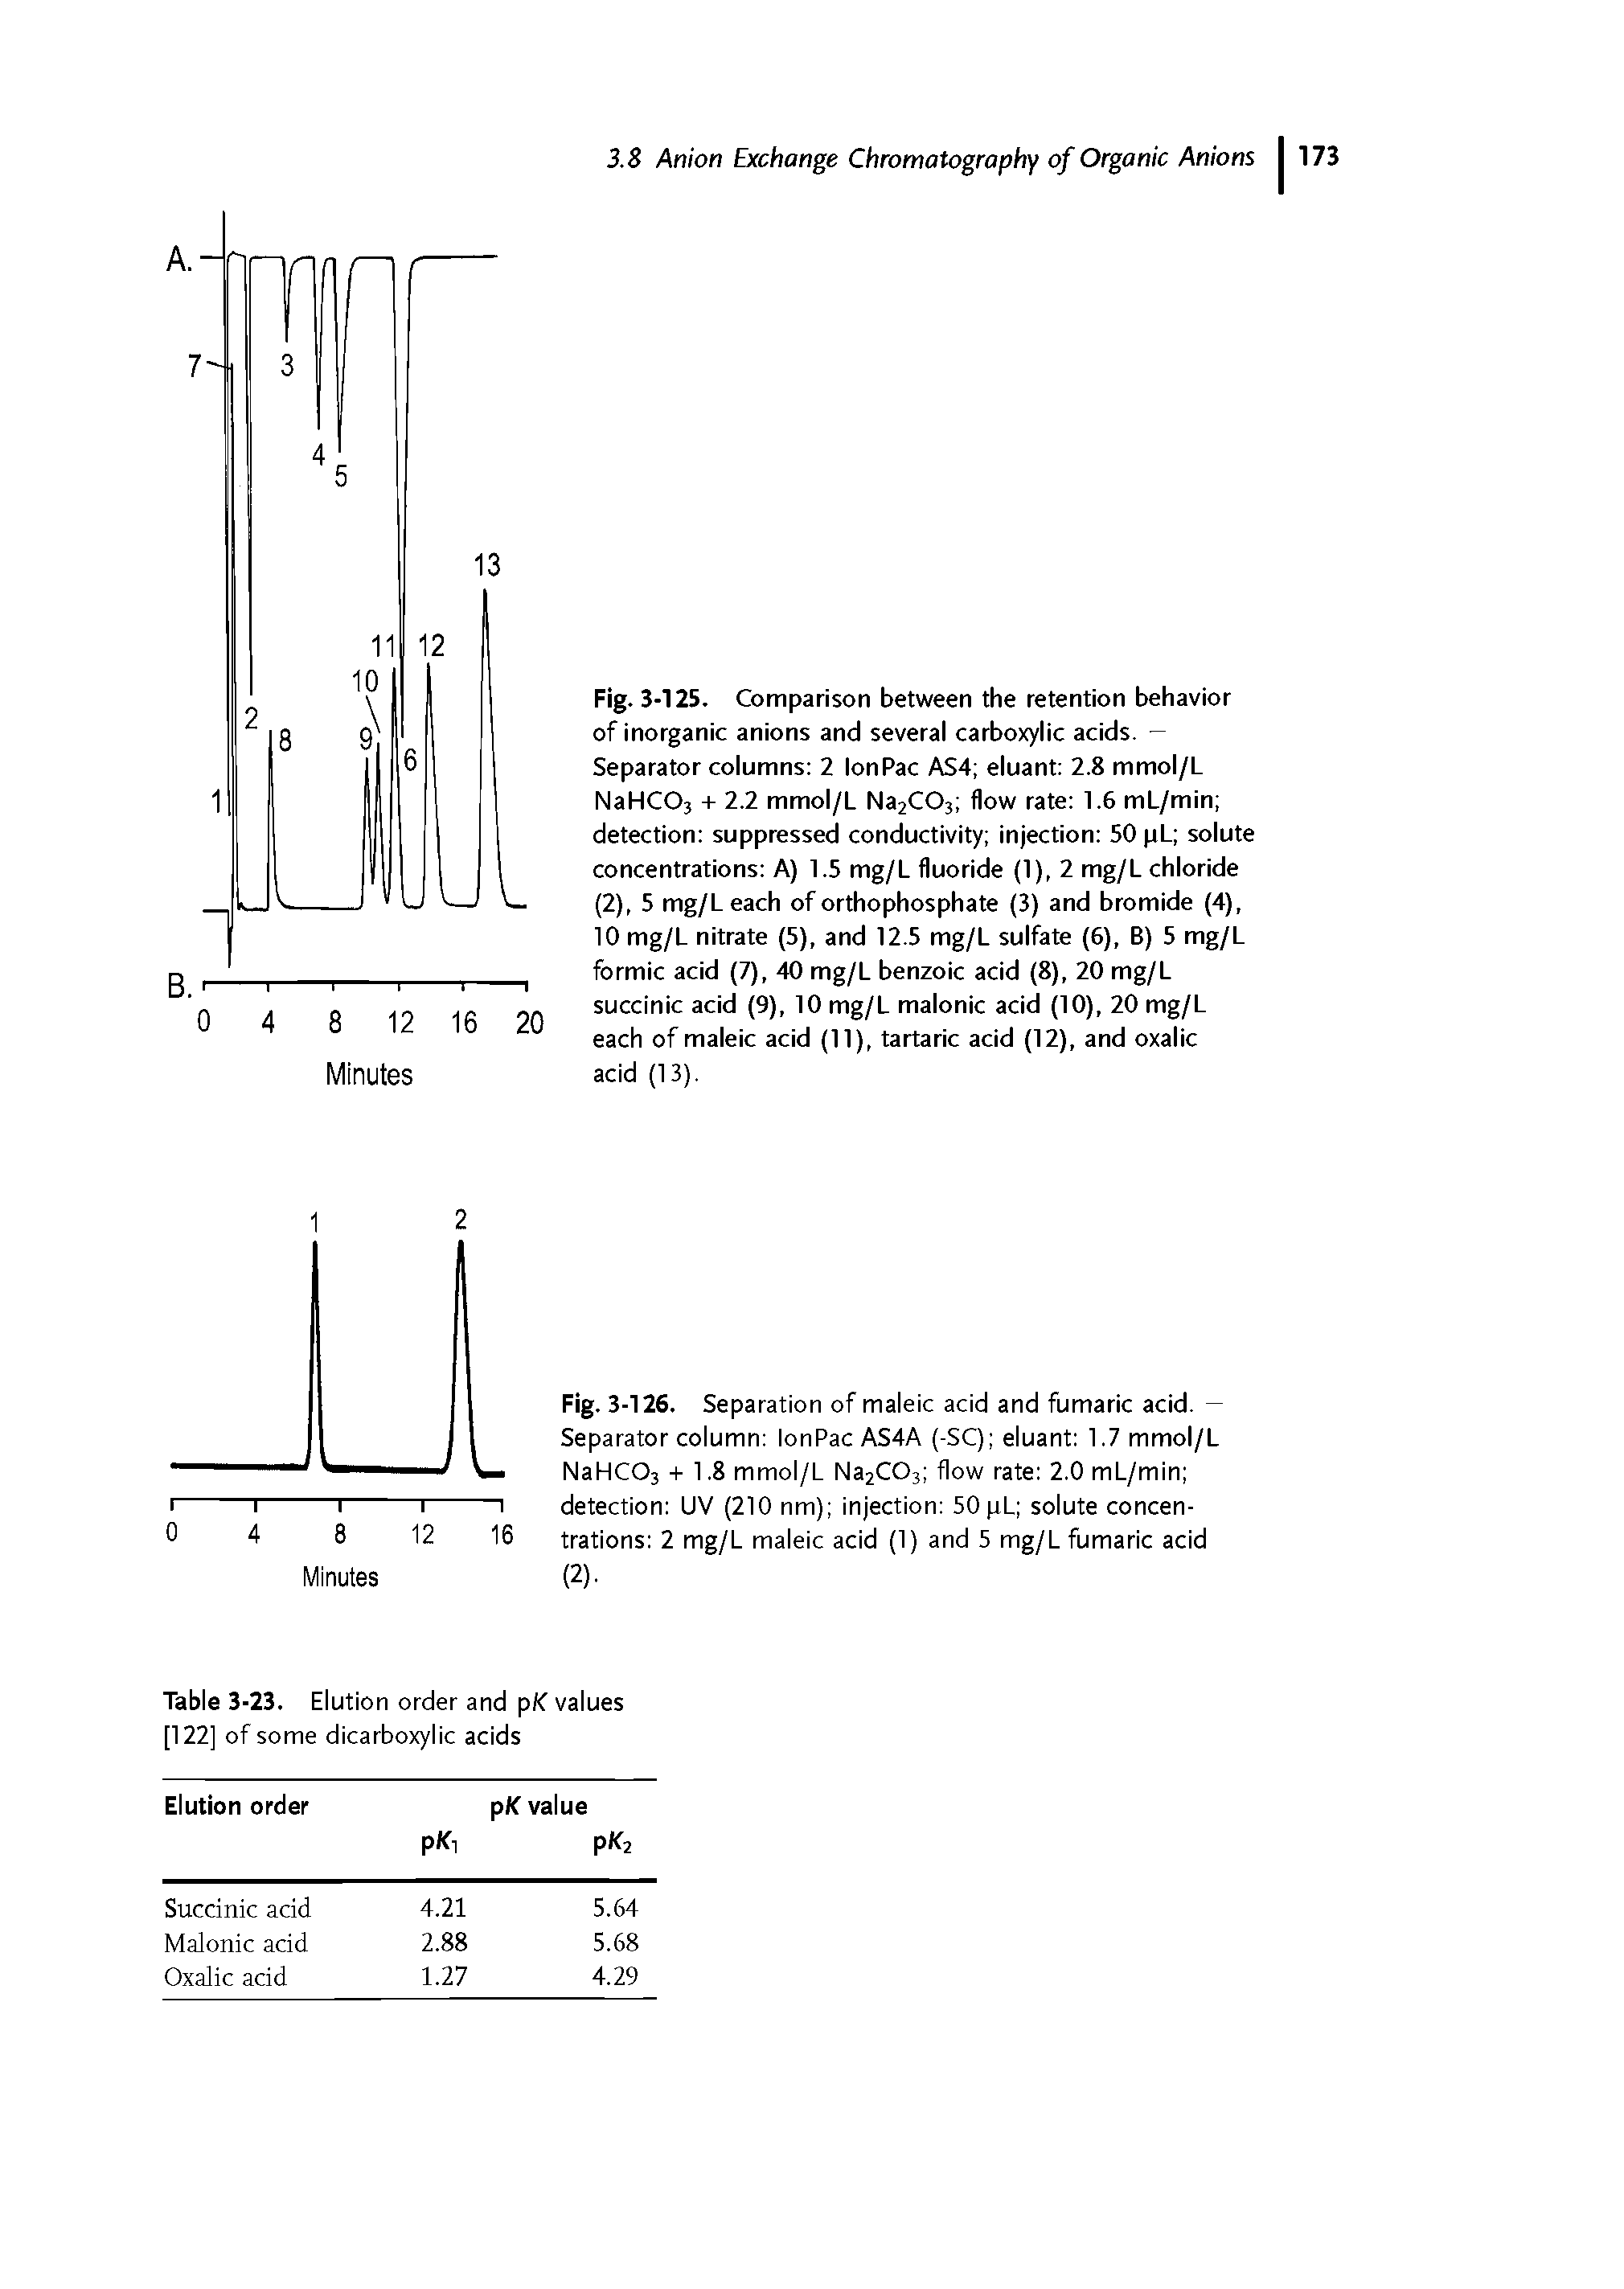 Fig. 3 -125. Comparison between the retention behavior of inorganic anions and several carboxylic acids. -Separator columns 2 lonPac AS4 eluant 2.8 mmol/L NaHCOs + 2.2 mmol/L Na2COj flow rate 1.6 mL/min detection suppressed conductivity injection 50 pL solute concentrations A) 1.5 mg/L fluoride (1), 2 mg/L chloride (2), 5 mg/L each of orthophosphate (3) and bromide (4), 10 mg/L nitrate (5), and 12.5 mg/L sulfate (6), B) 5 mg/L formic acid (7), 40 mg/L benzoic acid (8), 20 mg/L succinic acid (9), 10 mg/L malonic acid (10), 20 mg/L each of maleic acid (11), tartaric acid (12), and oxalic acid (13).